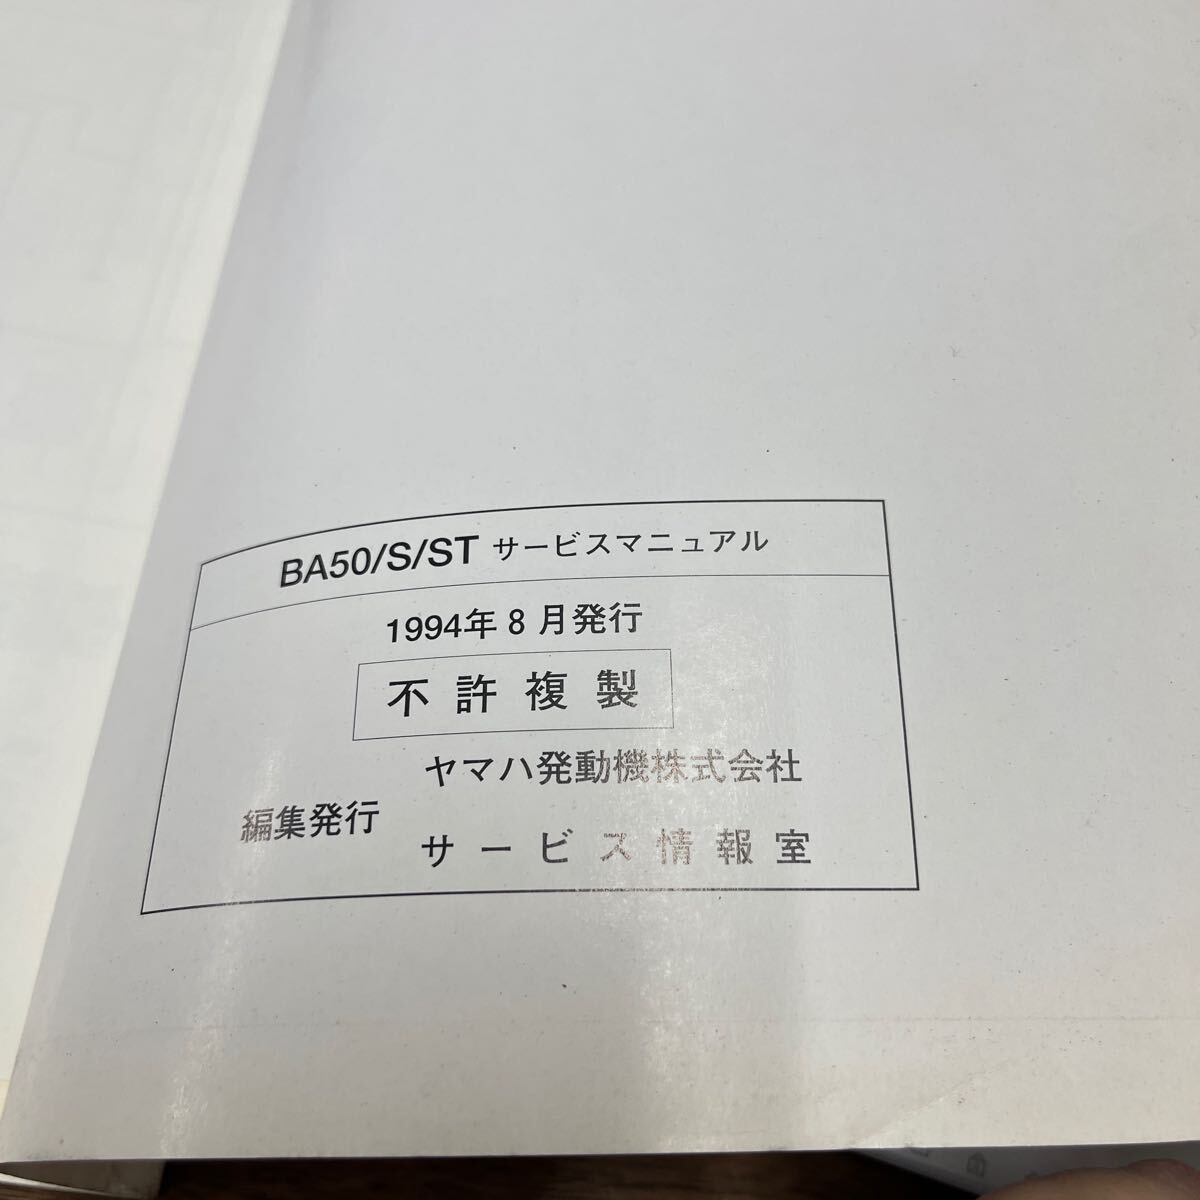 MB-2962* click post ( nationwide equal postage 185 jpy ) YAMAHA BUSINESS Yamaha service manual BA50/S/ST GEAR 4KN-28197-00 1994 year 8 month N-4/②